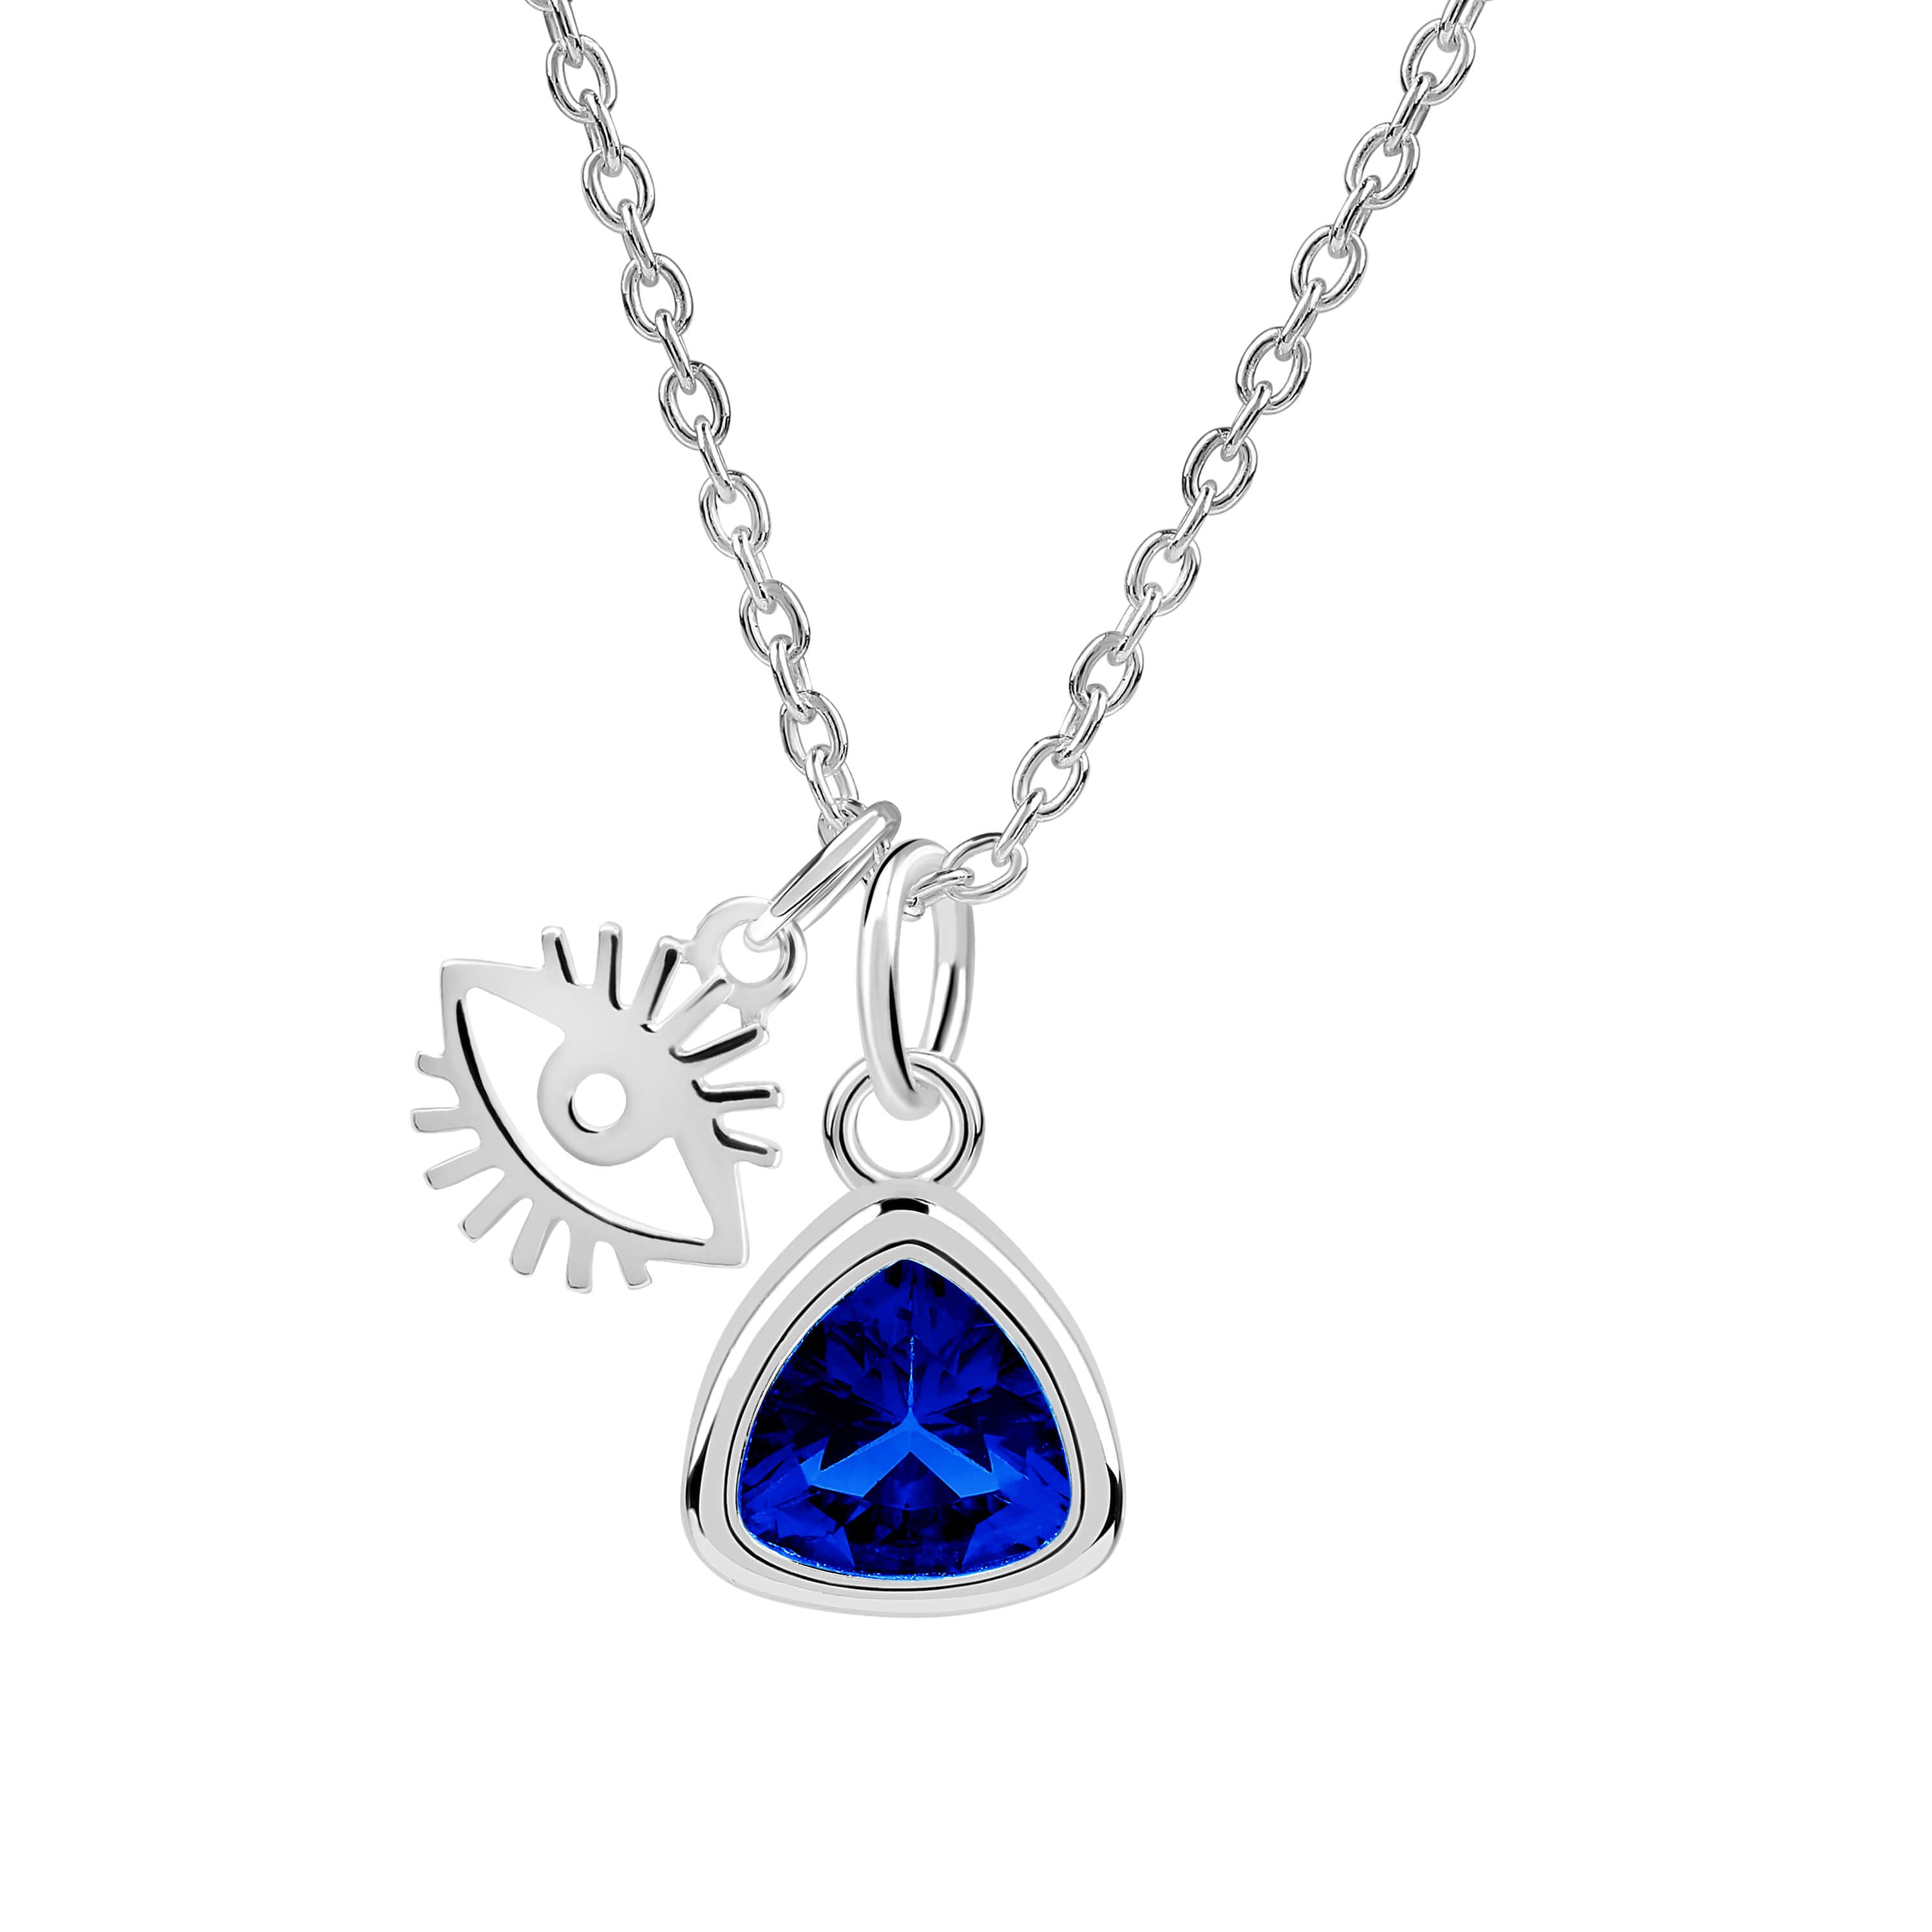 Evil Eye Charm with Birthstone Necklace